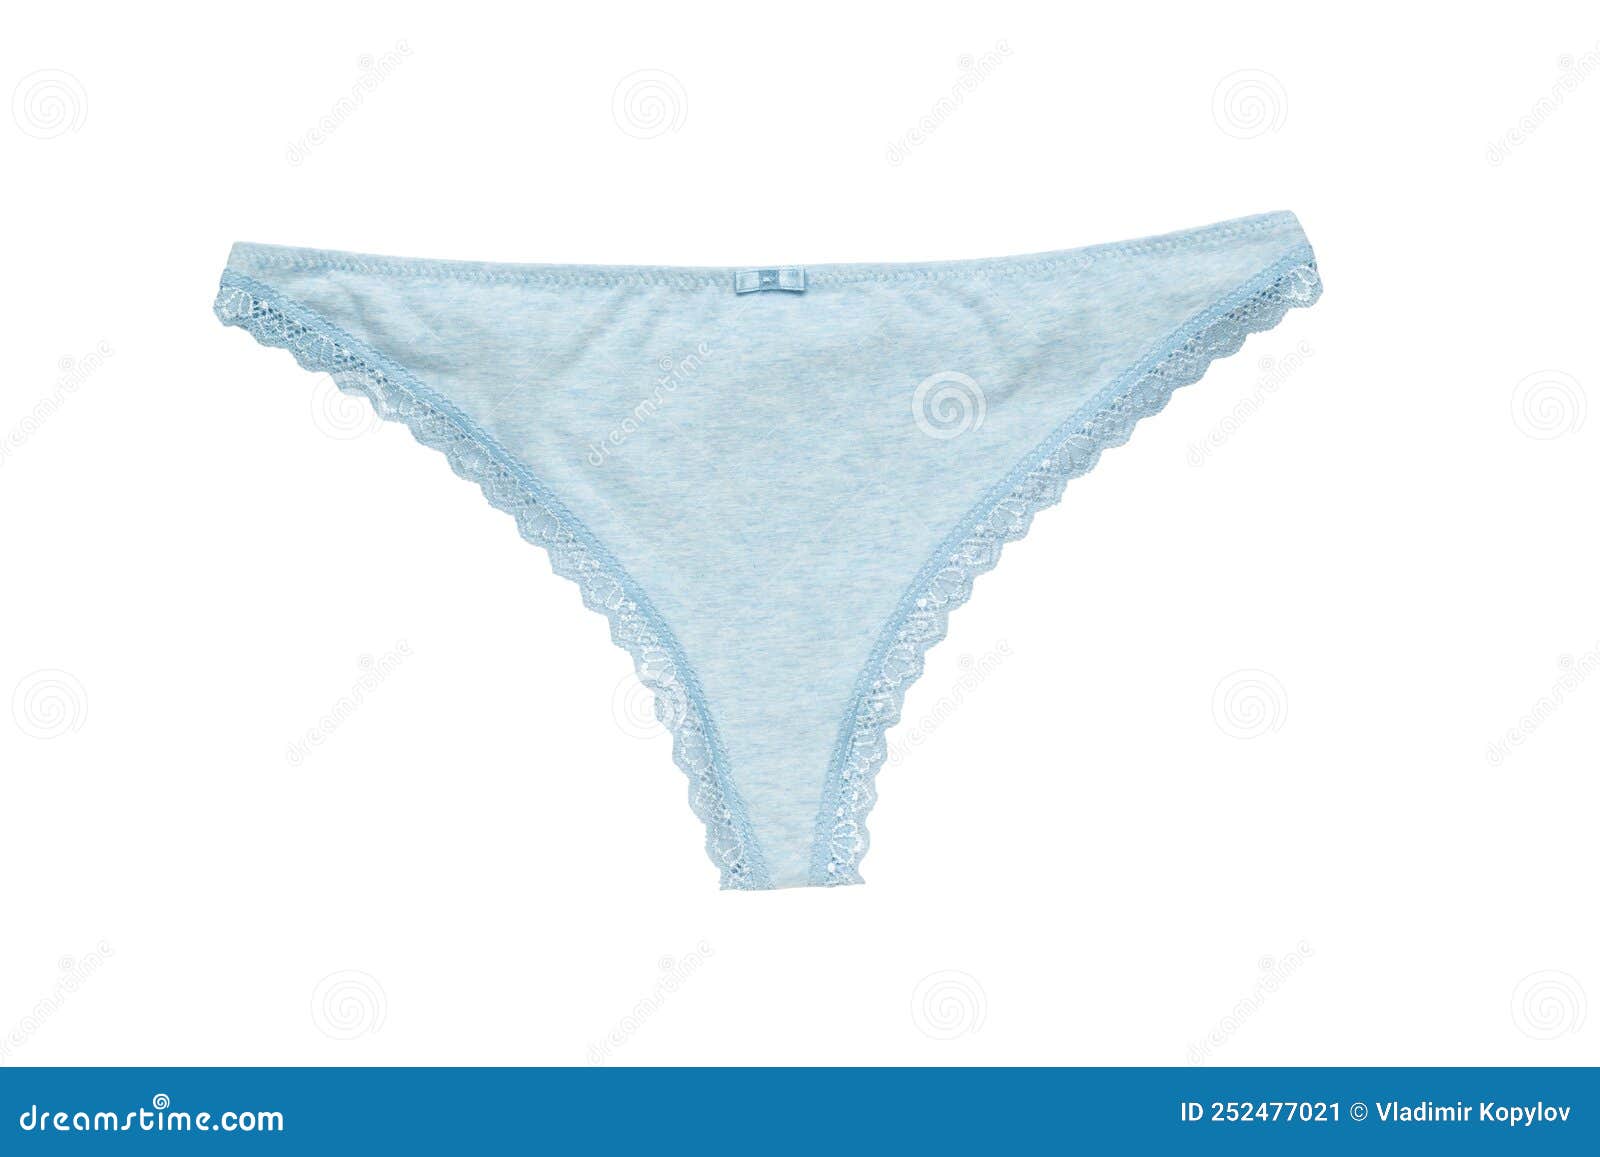 Woman S Behind in Blue Lace Panties Stock Image - Image of skimpy